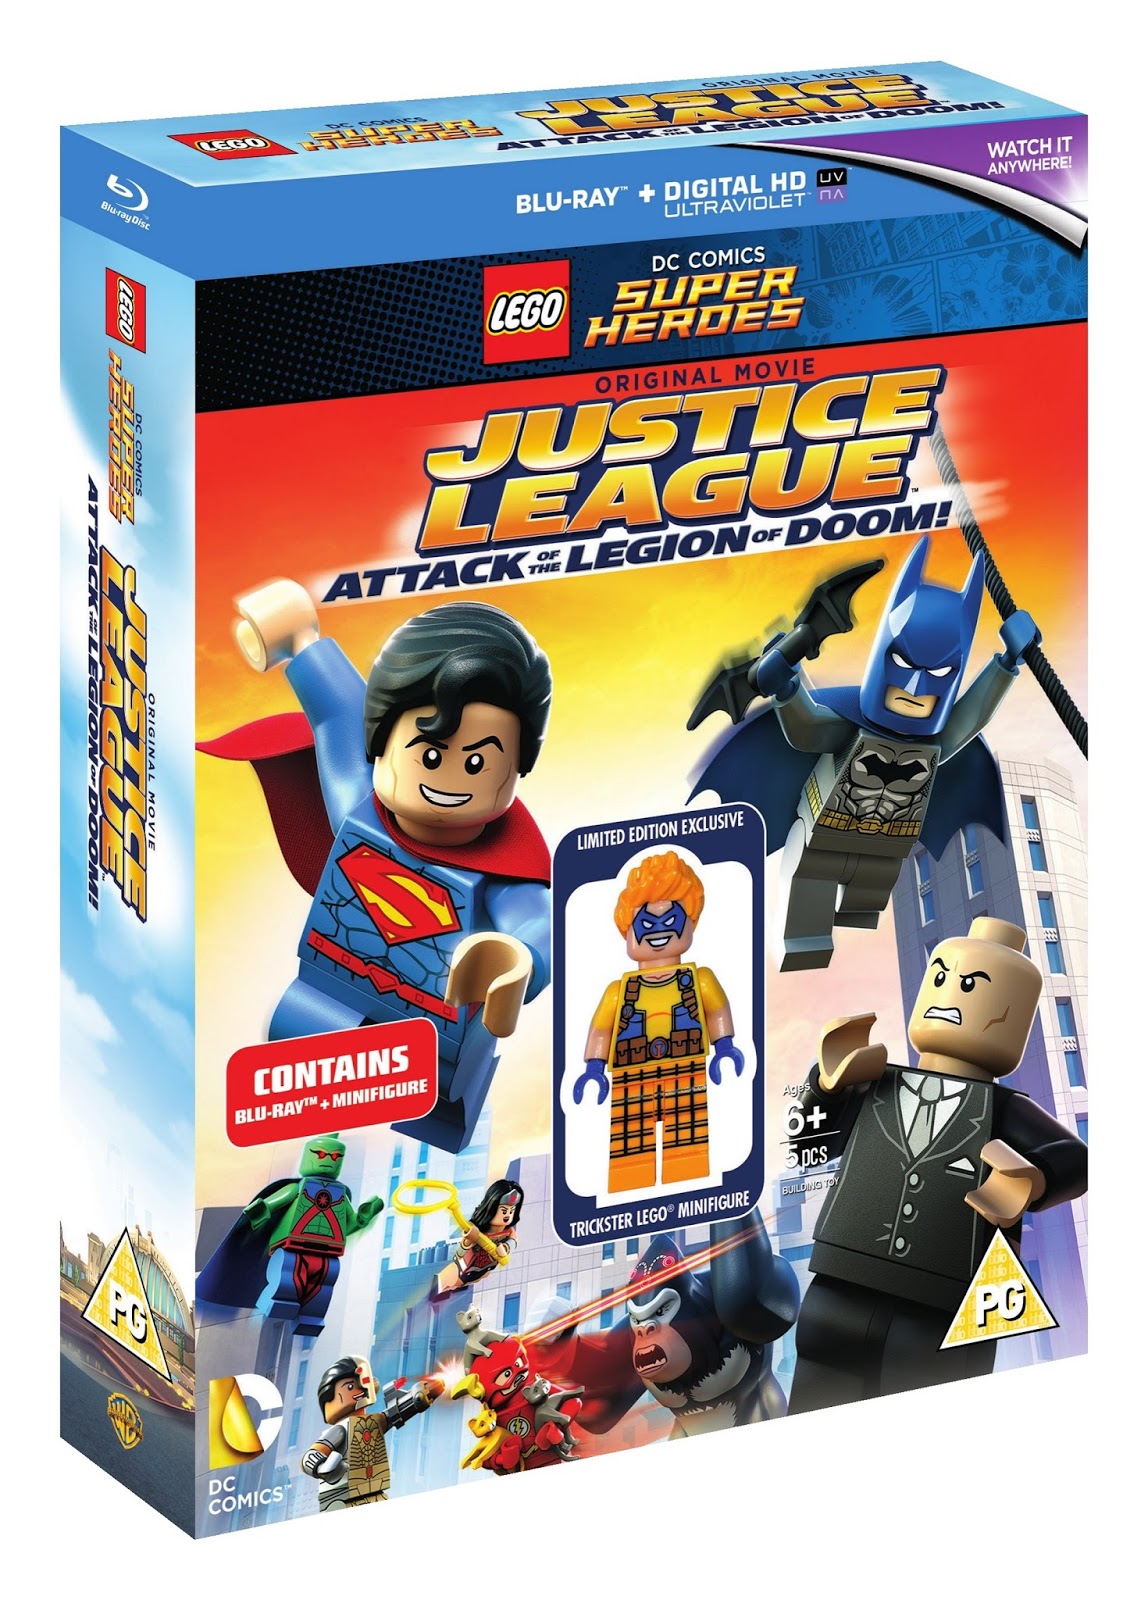 LEGO DC Super Heroes: Justice League - Attack Of The Legion Of Doom! #2